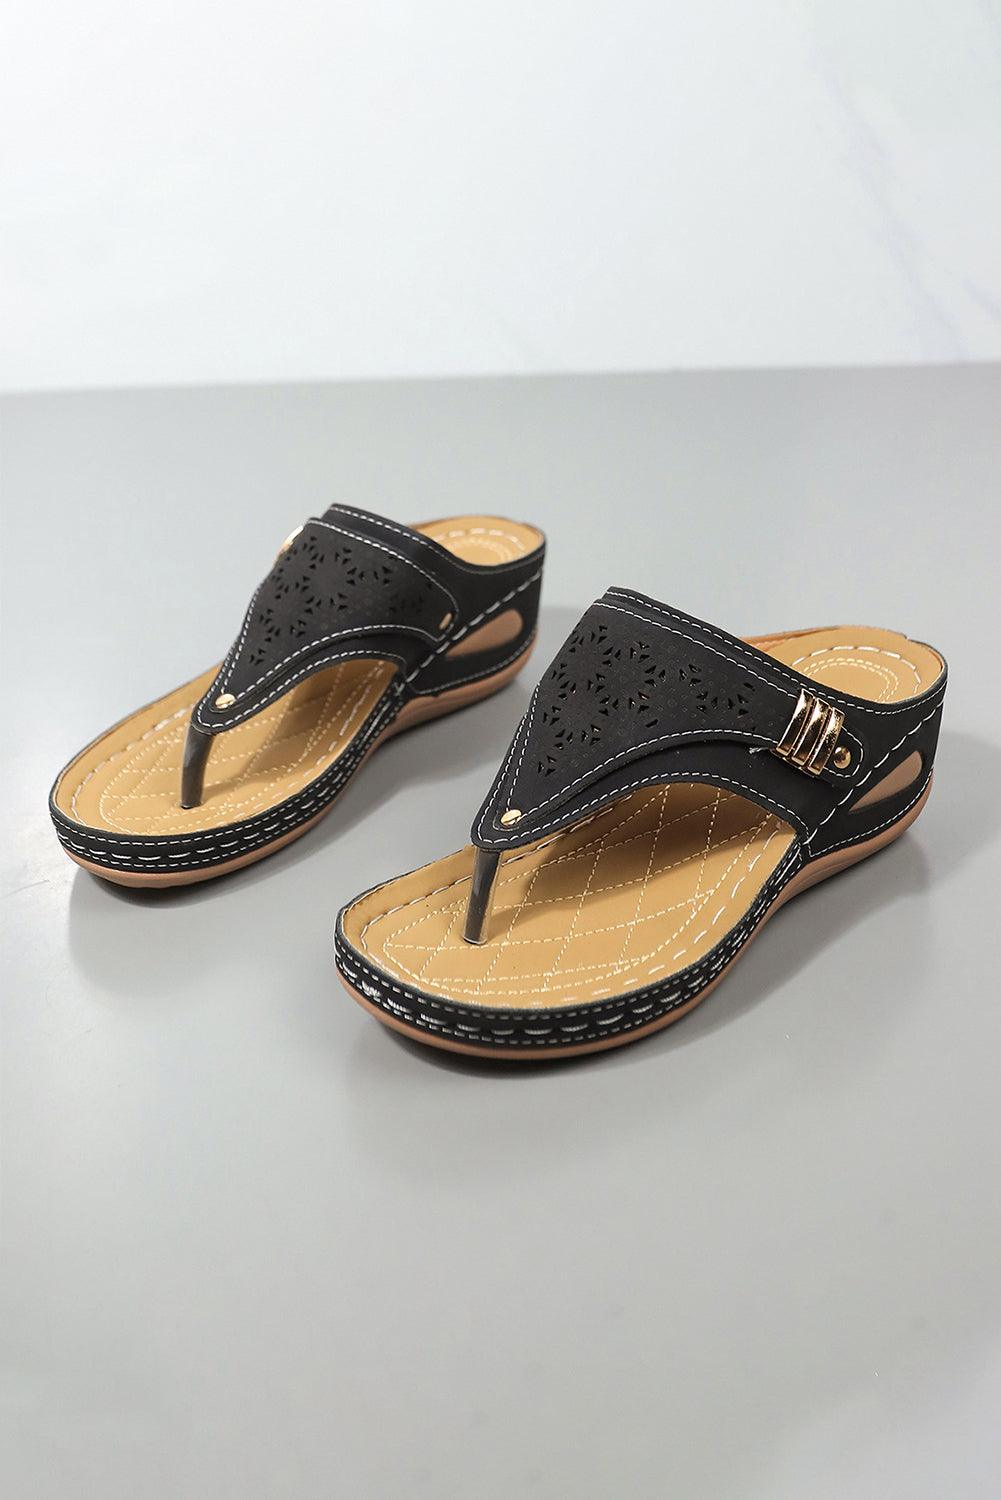 Black Hollow Out Clip Toe Wedge Slippers - L & M Kee, LLC